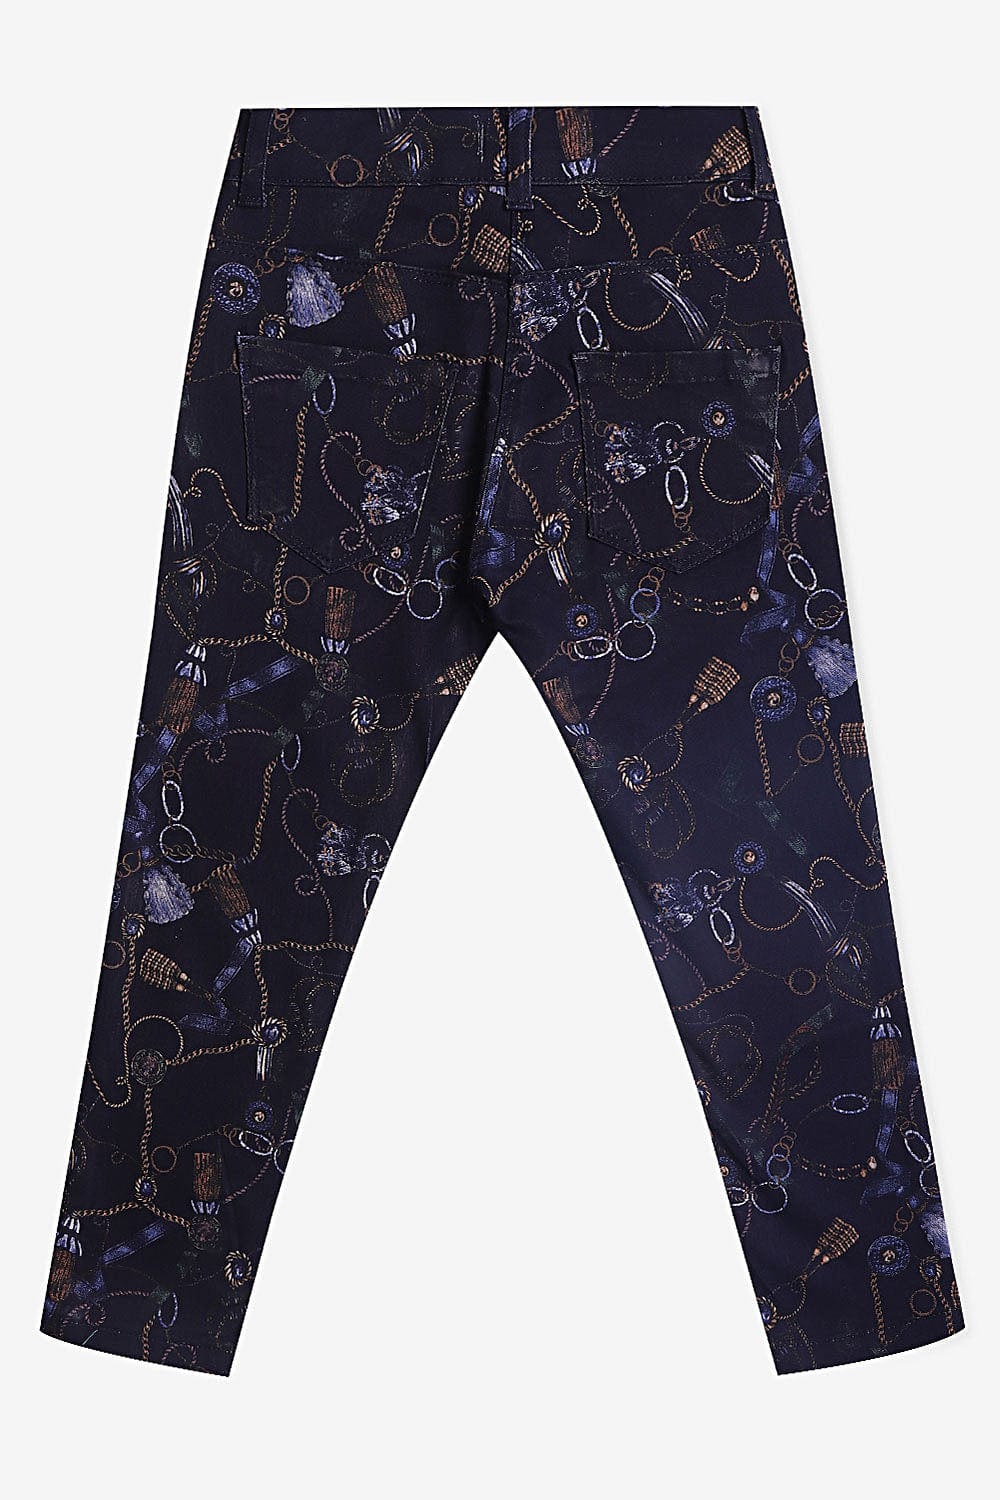 Hope Not Out by Shahid Afridi Girls Non Denim Pants All Over Printed Pants